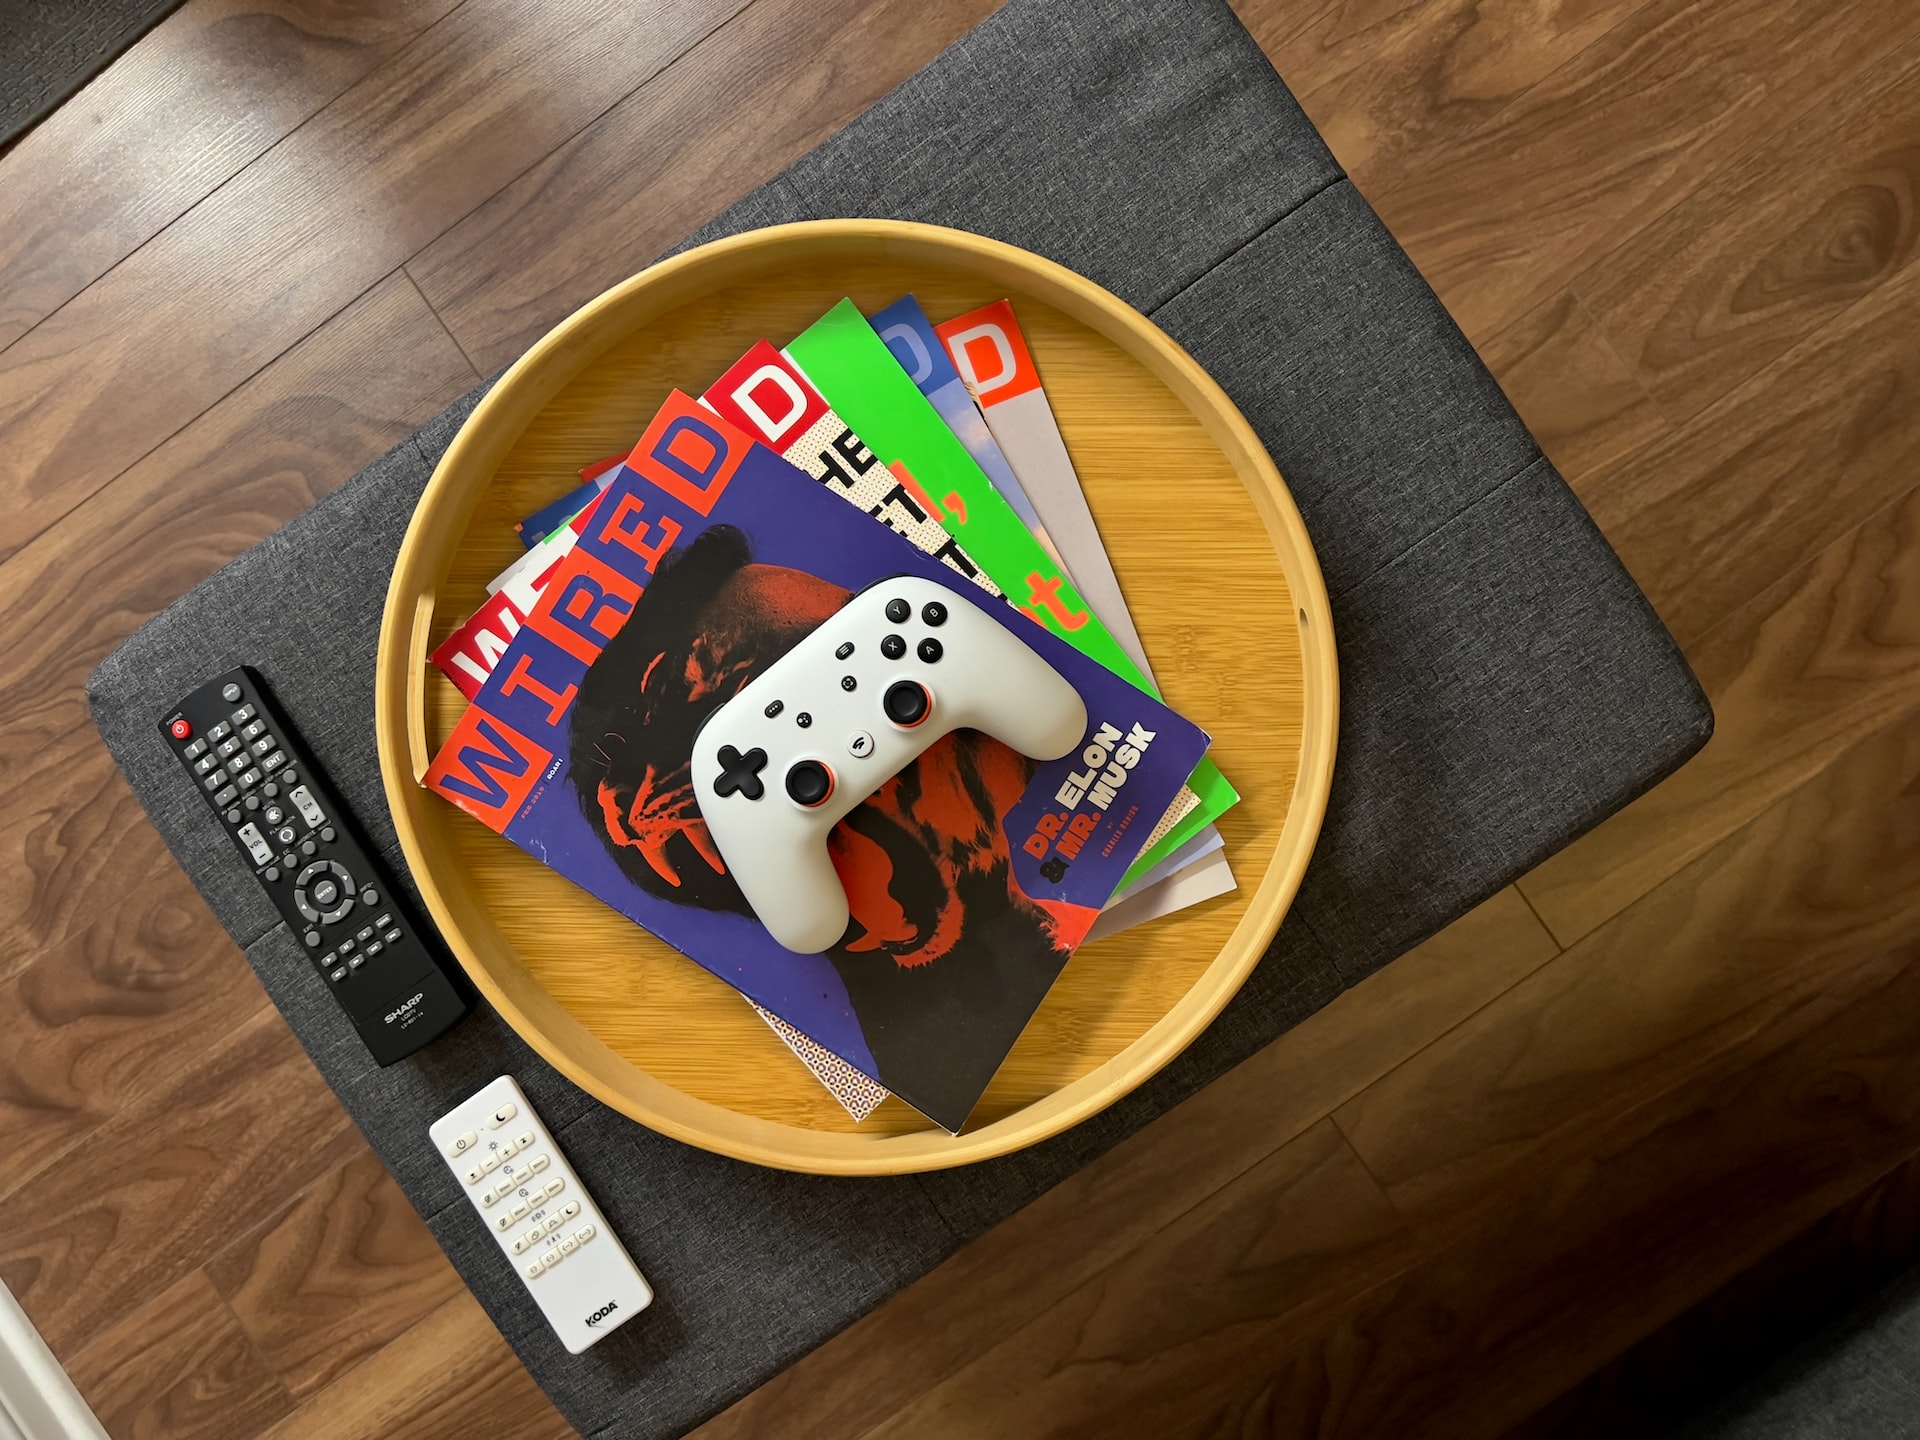 Stadia gaming controller on top of a some WIRED magazines on a round container placed on a table